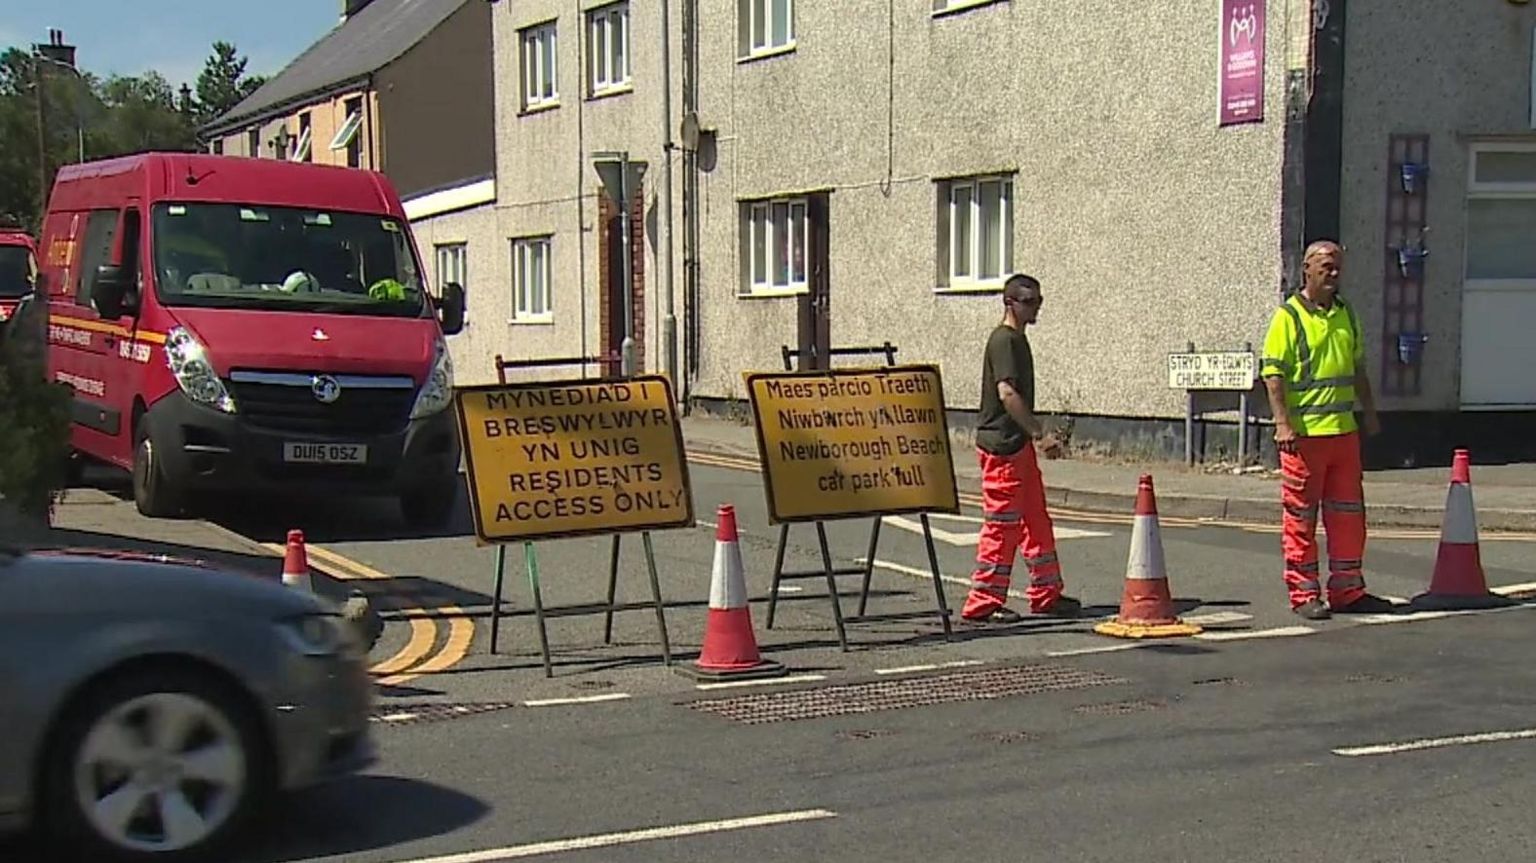 Road in the centre of Newborough with yellow closure signs, cones and traffic management staff